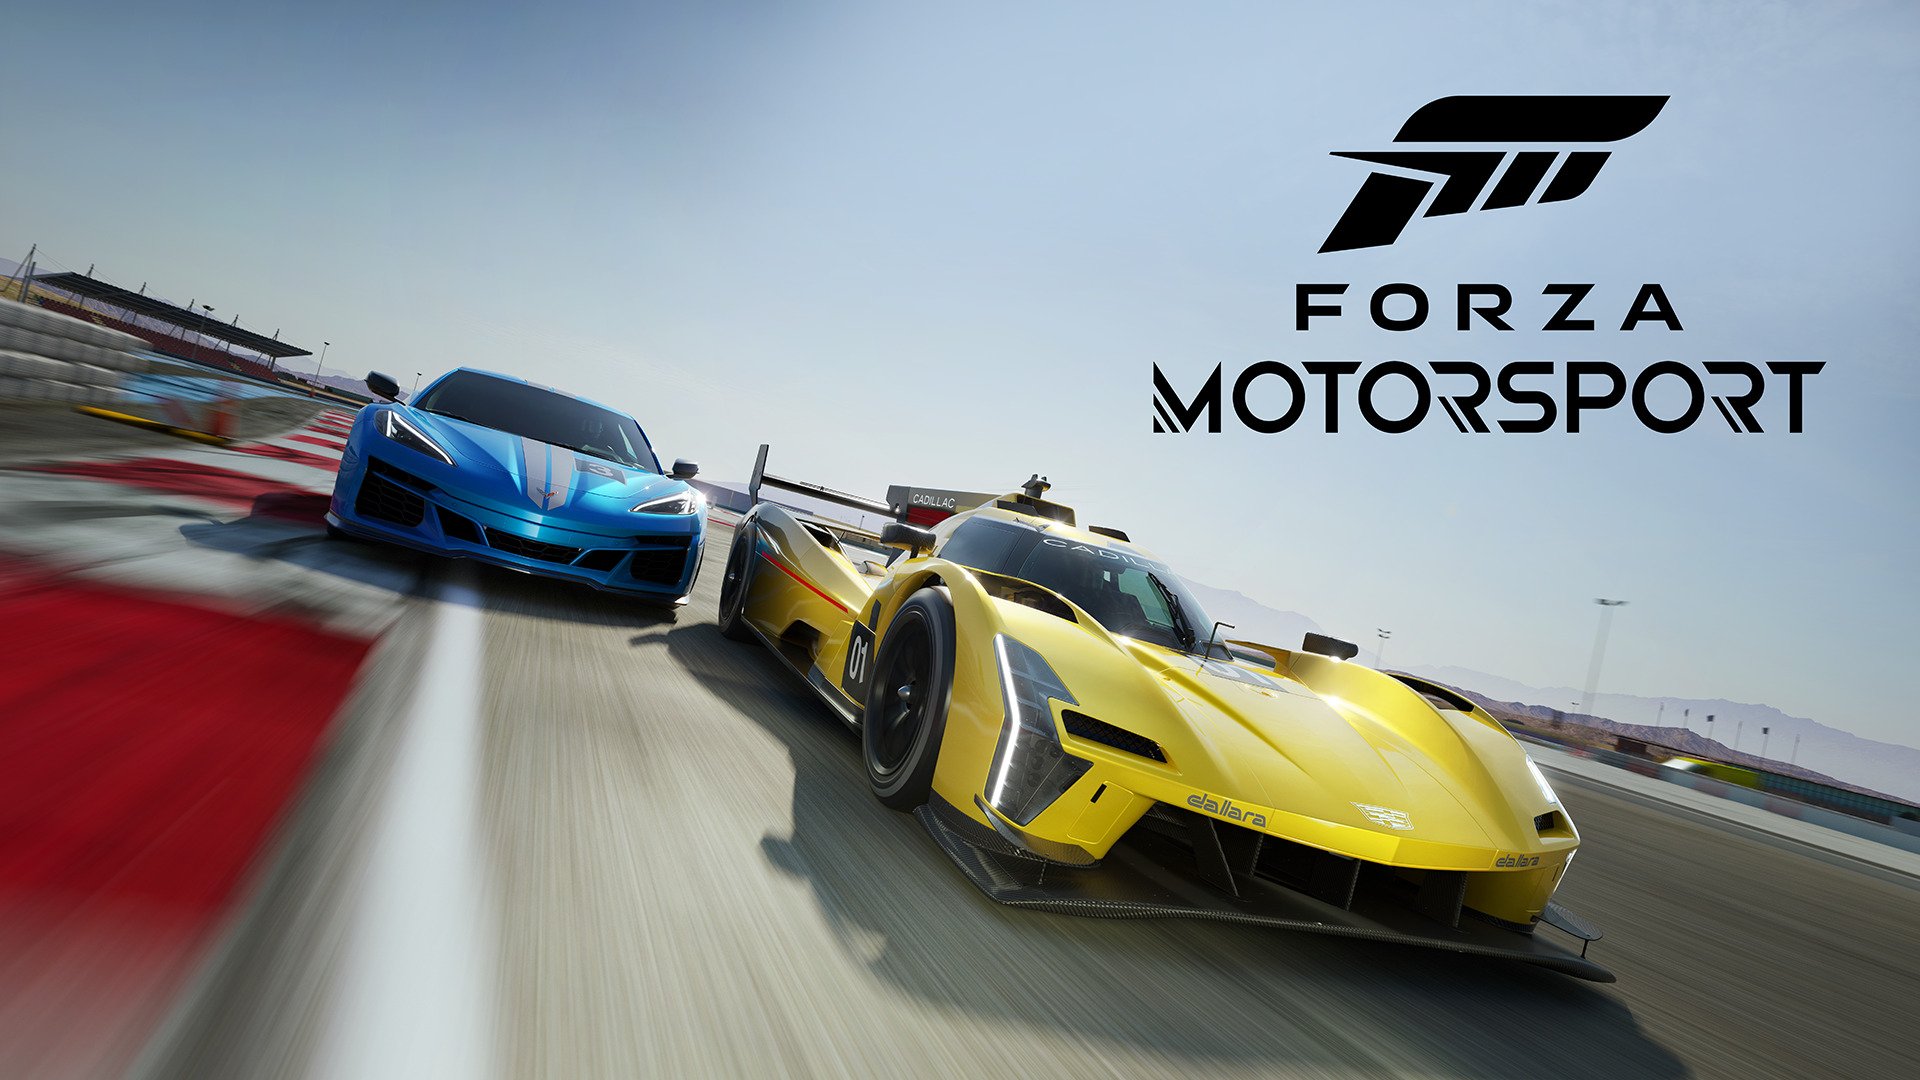 New Ford GT Design Team Featured In Forza 6 Game Promo: Video